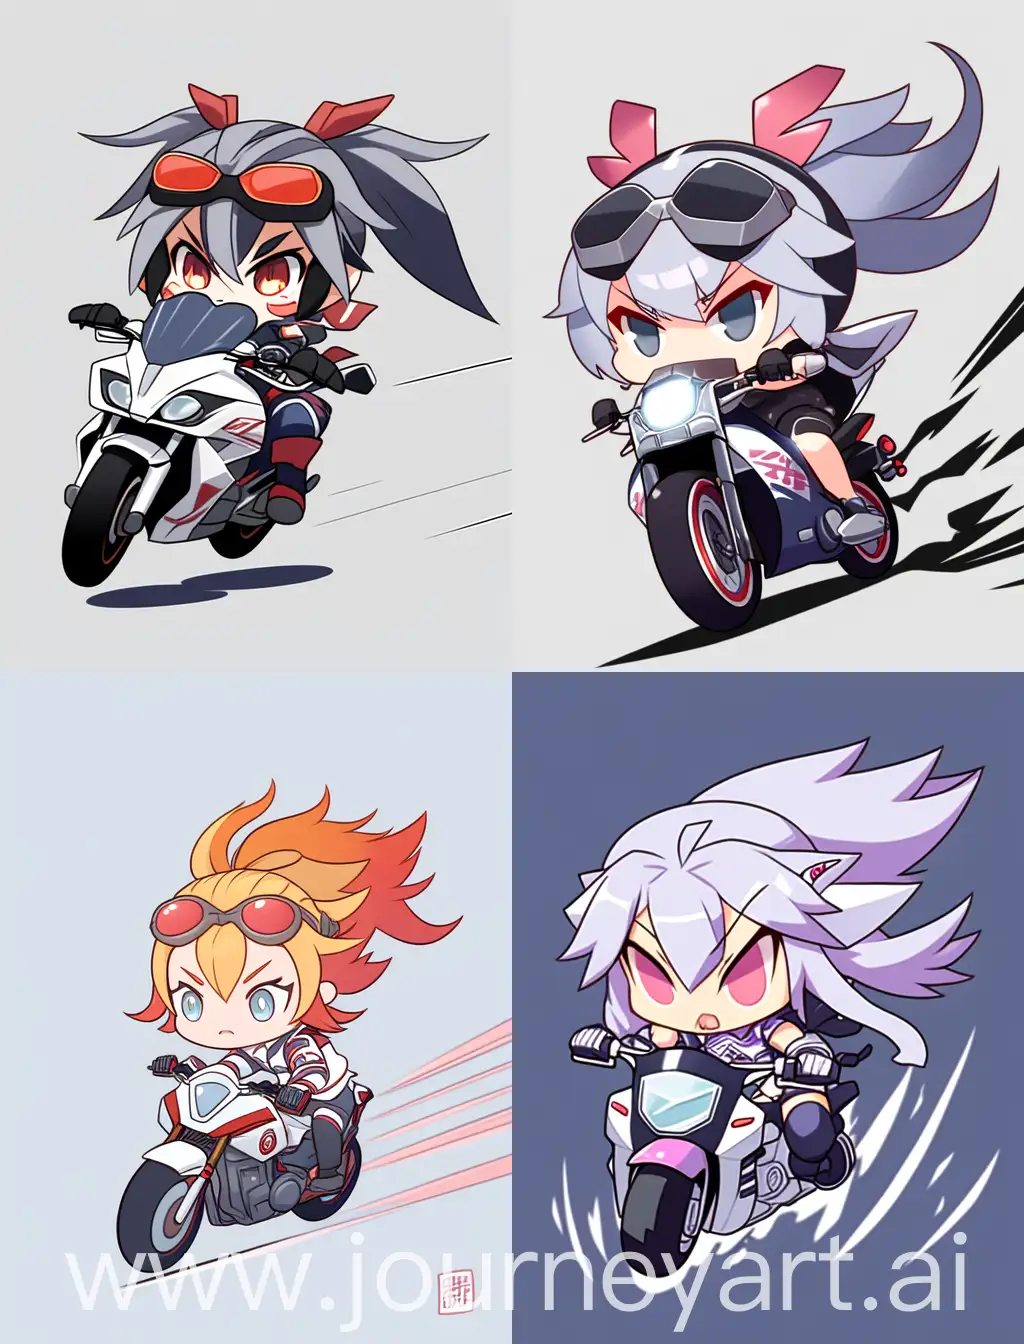 angry chibi anime girl riding a motorcycle, cartoon anime style, with strong lines, with grey solid background